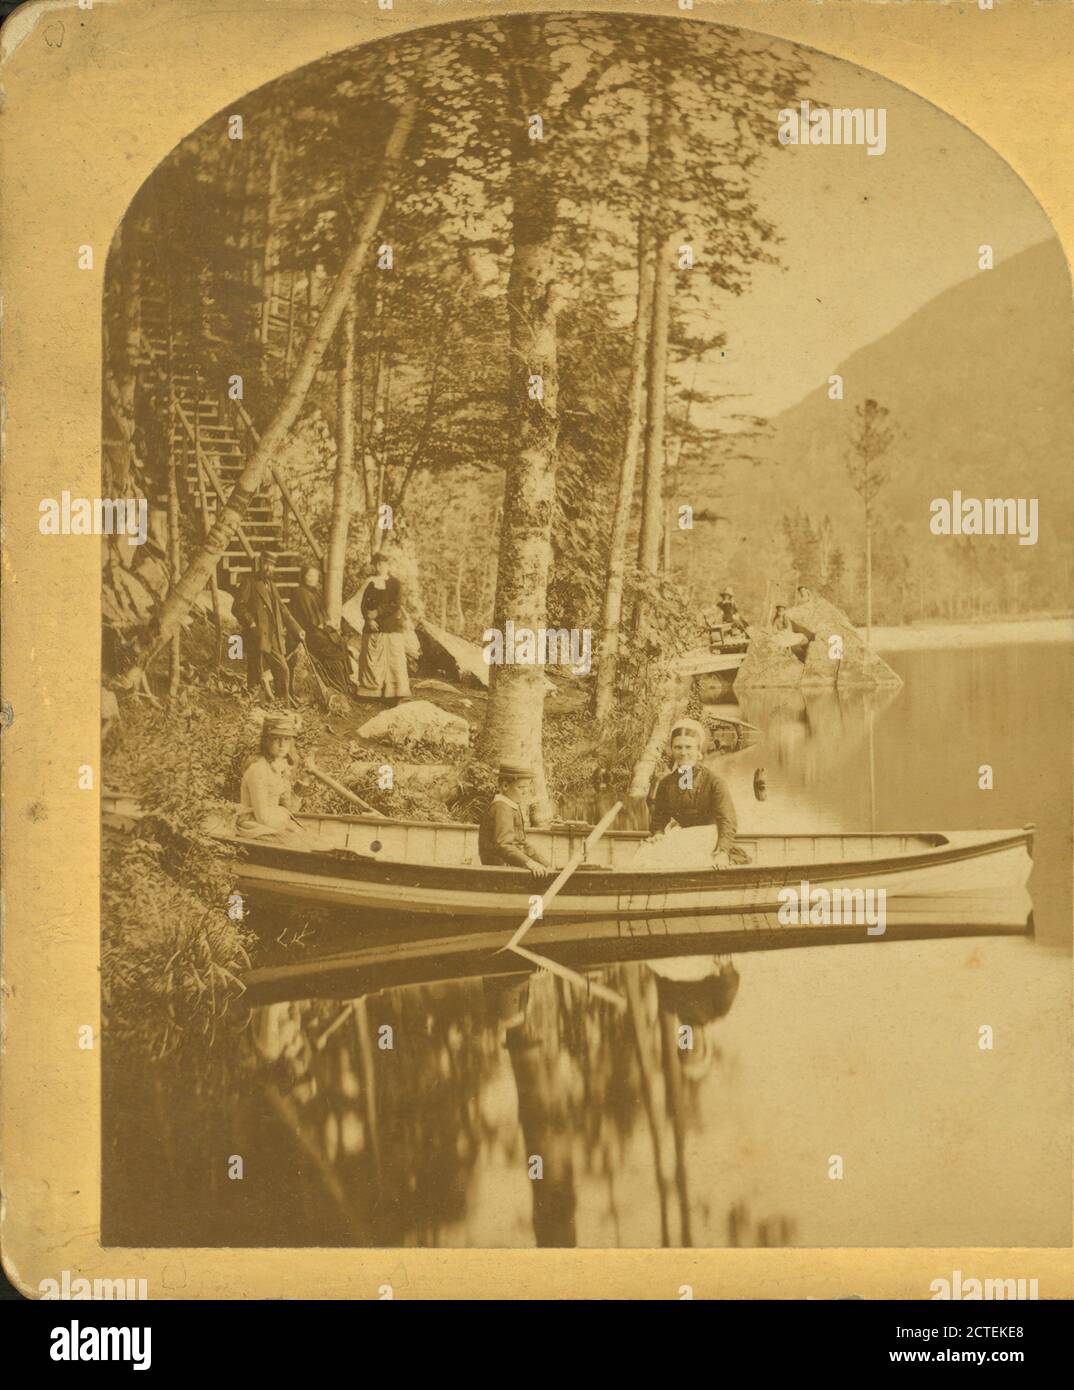 Idlewild, Crawford Notch,White Mts., Kilburn, B. W. (Benjamin West) (1827-1909), Women, Boys, Girls, Men, Boats, Rowboats, Bodies of water, Shorelines, New Hampshire, Crawford Notch (N.H.), White Mountains (N.H. and Me Stock Photo